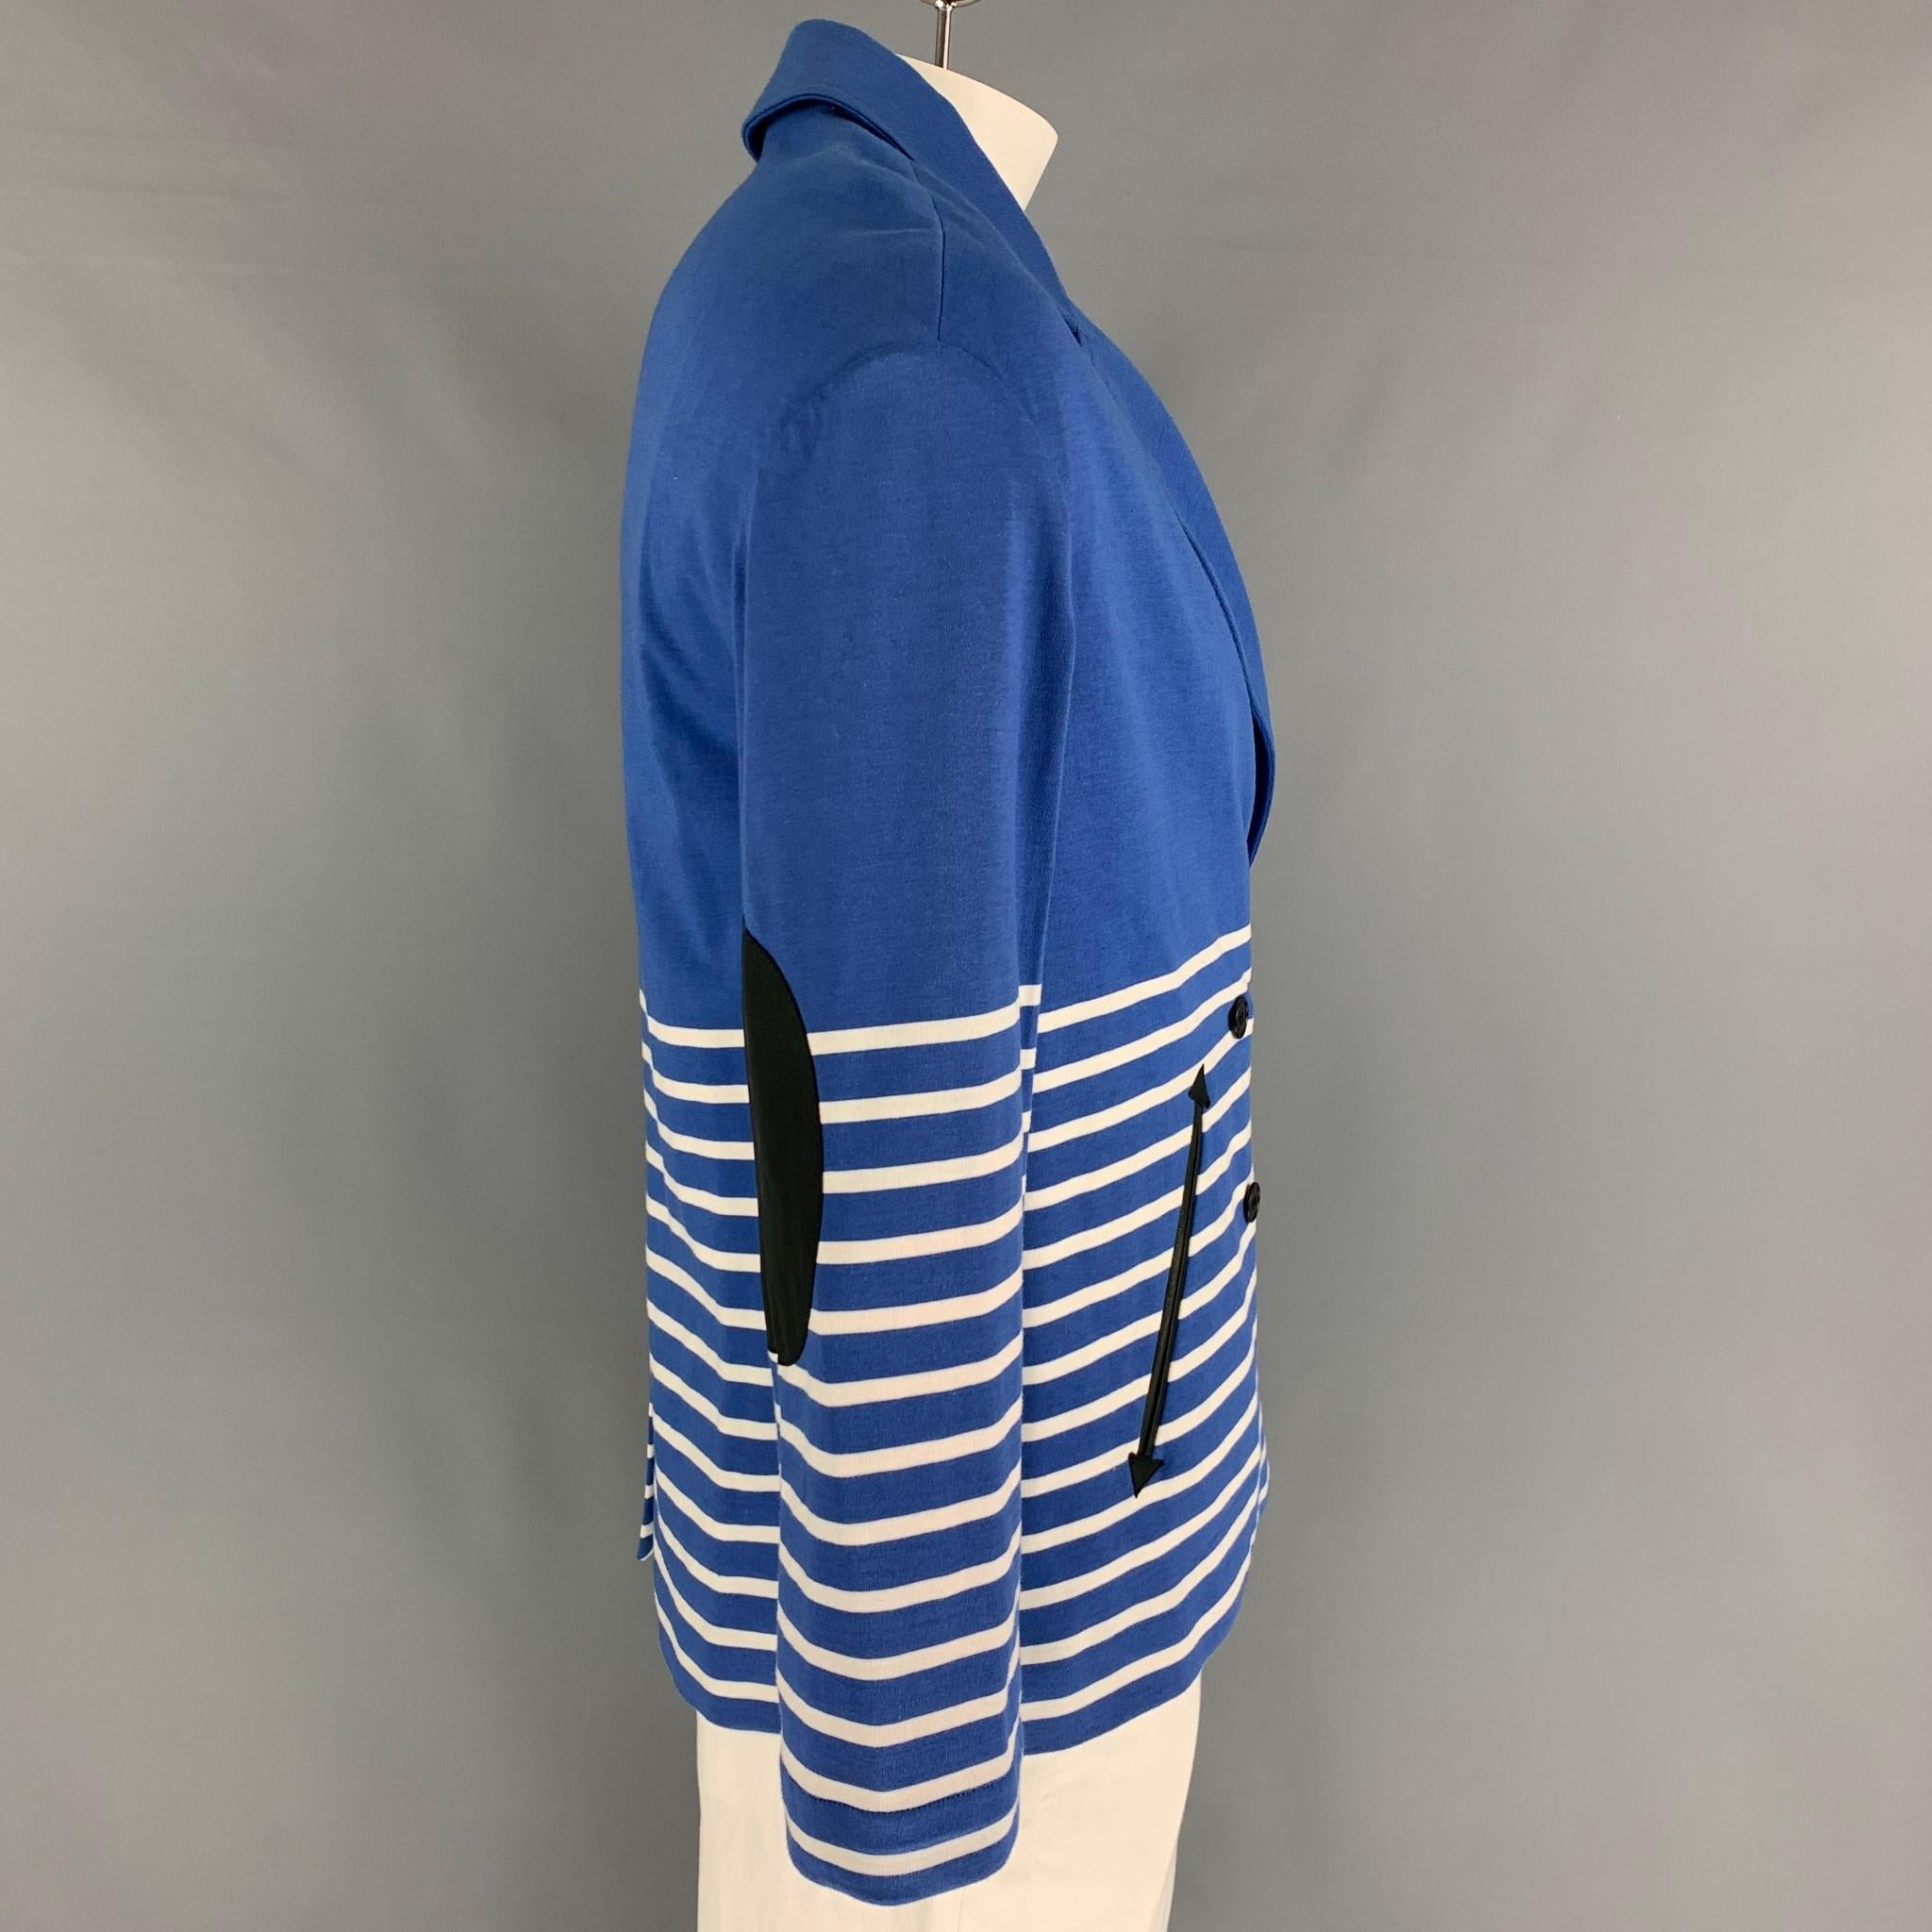 BAND OF OUTSIDERS jacket comes in a blue & white stripe cotton featuring a notch lapel, leather elbow patches, single back vent, and a double breasted closure. Made in Italy.

Very Good Pre-Owned Condition.
Marked: 3

Measurements:

Shoulder: 21